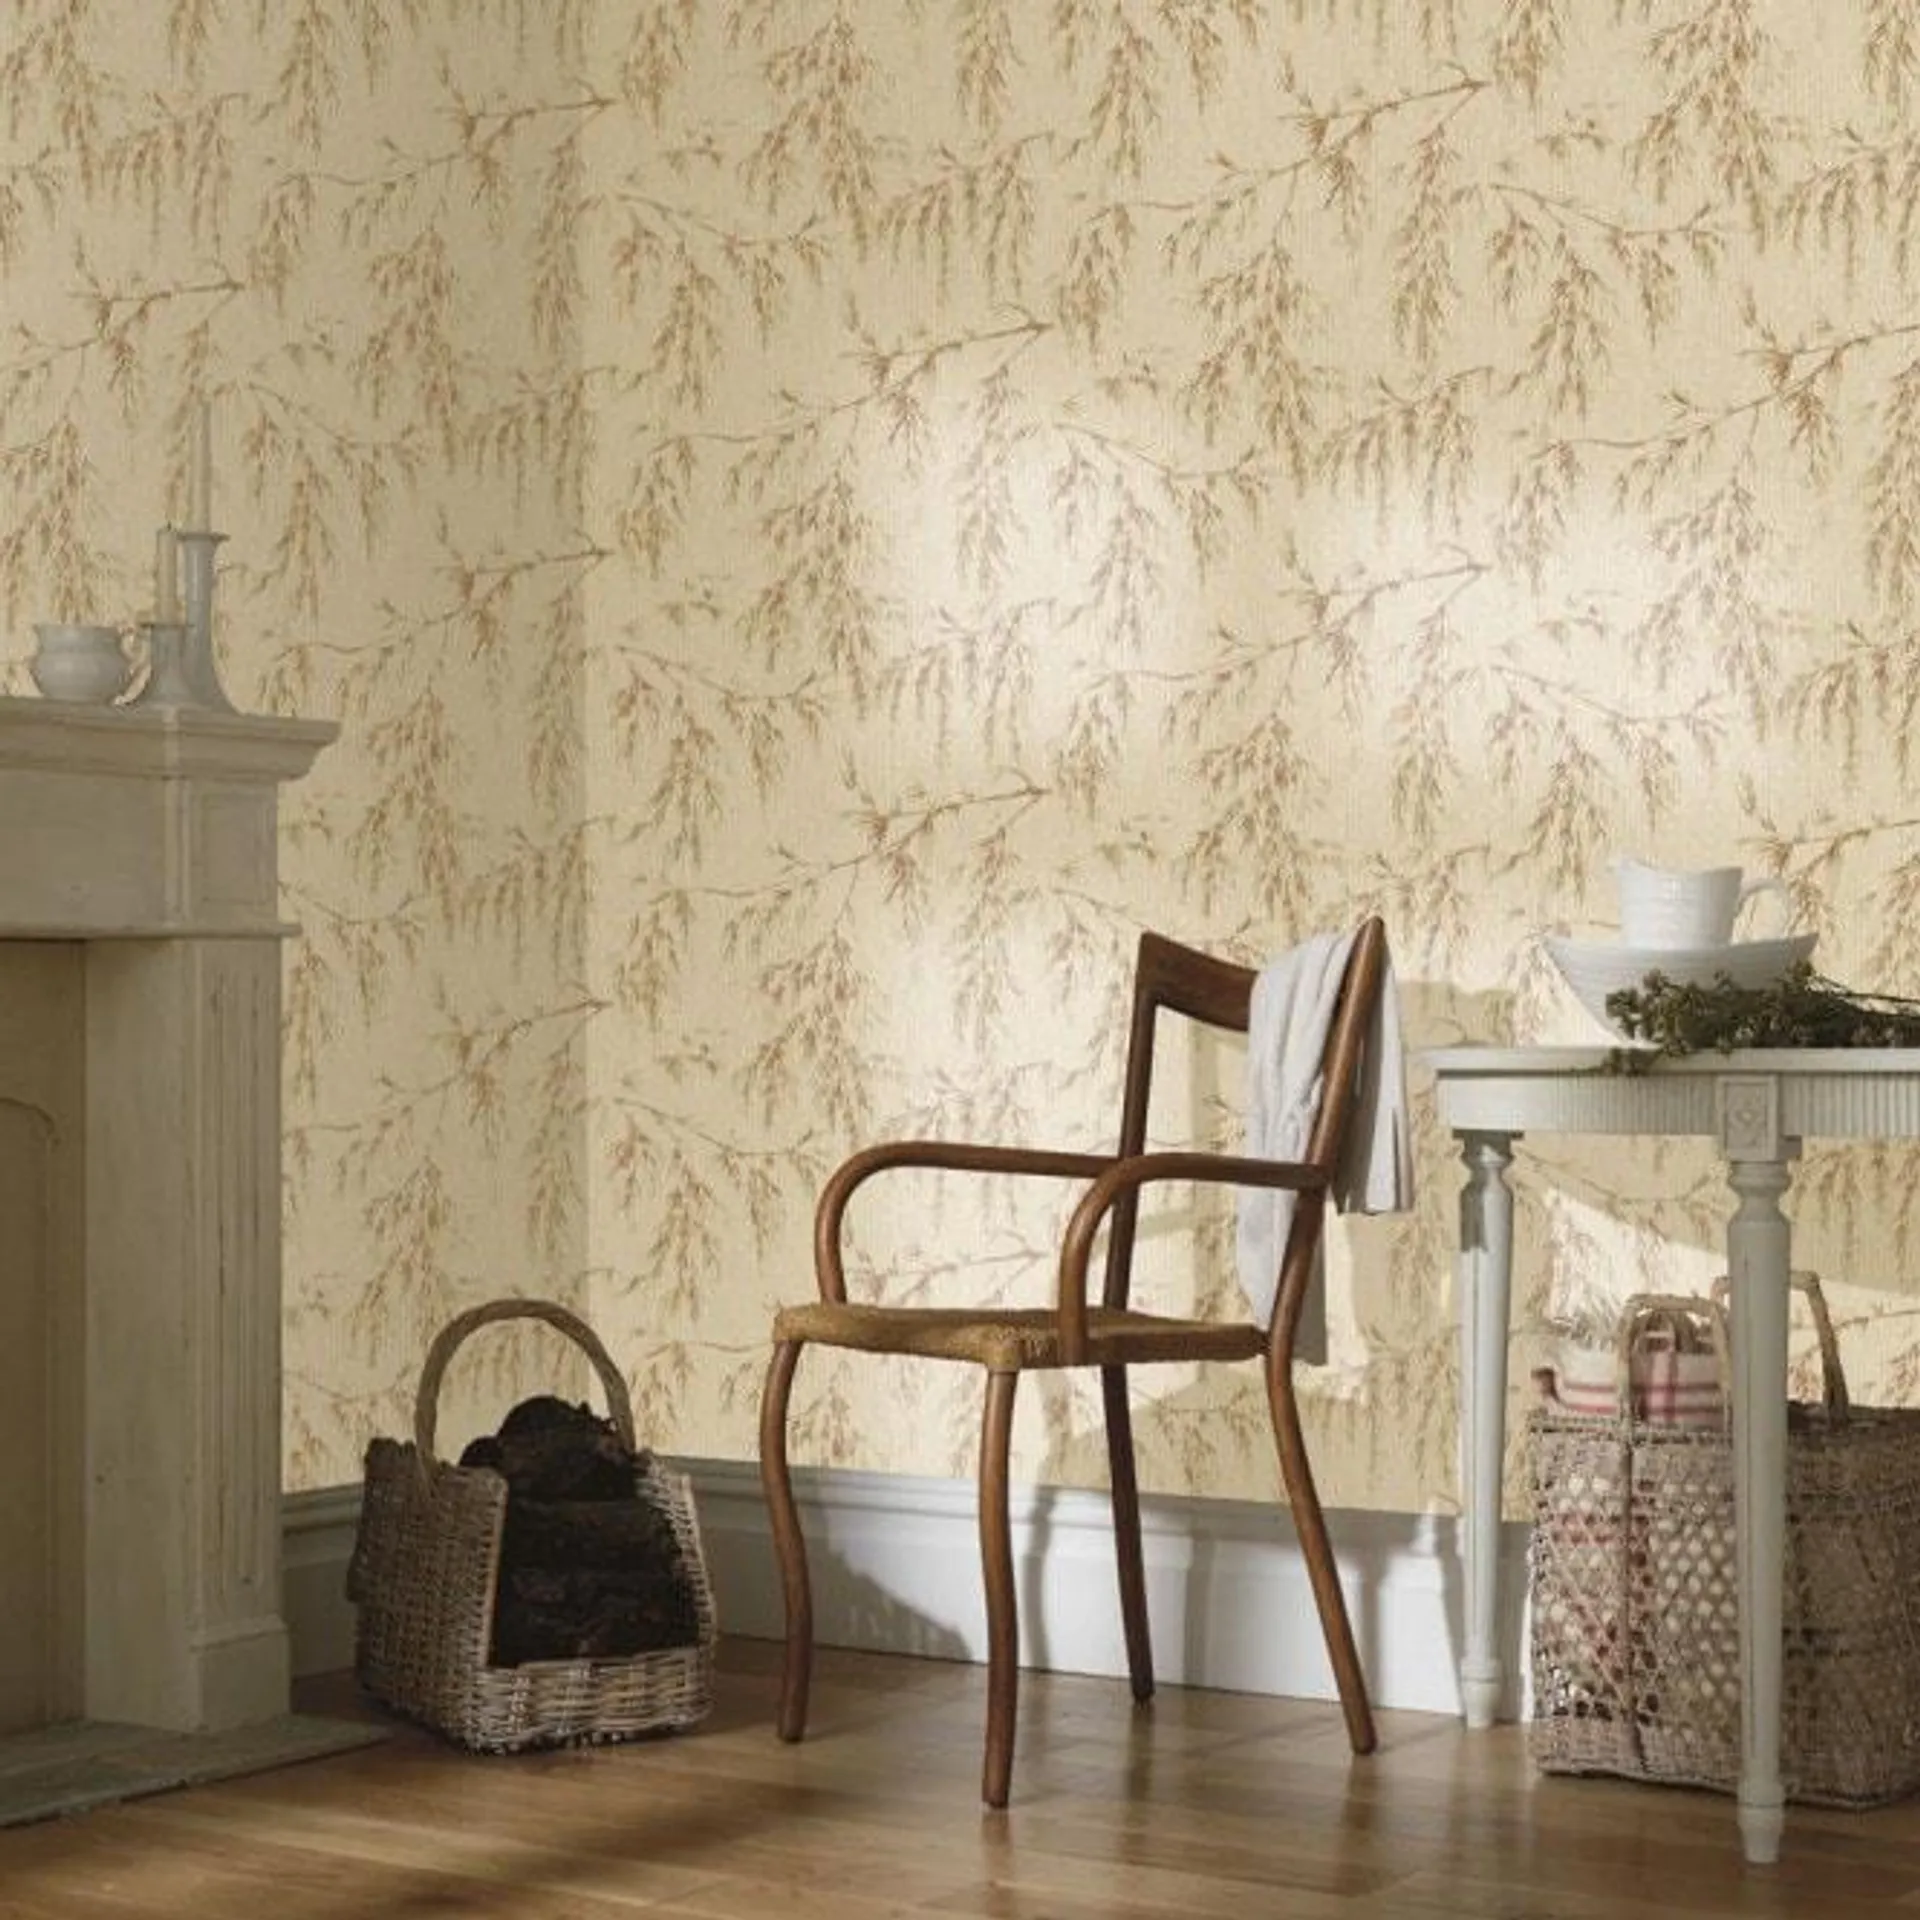 Willow Tree Wallpaper in Neutral and Rust